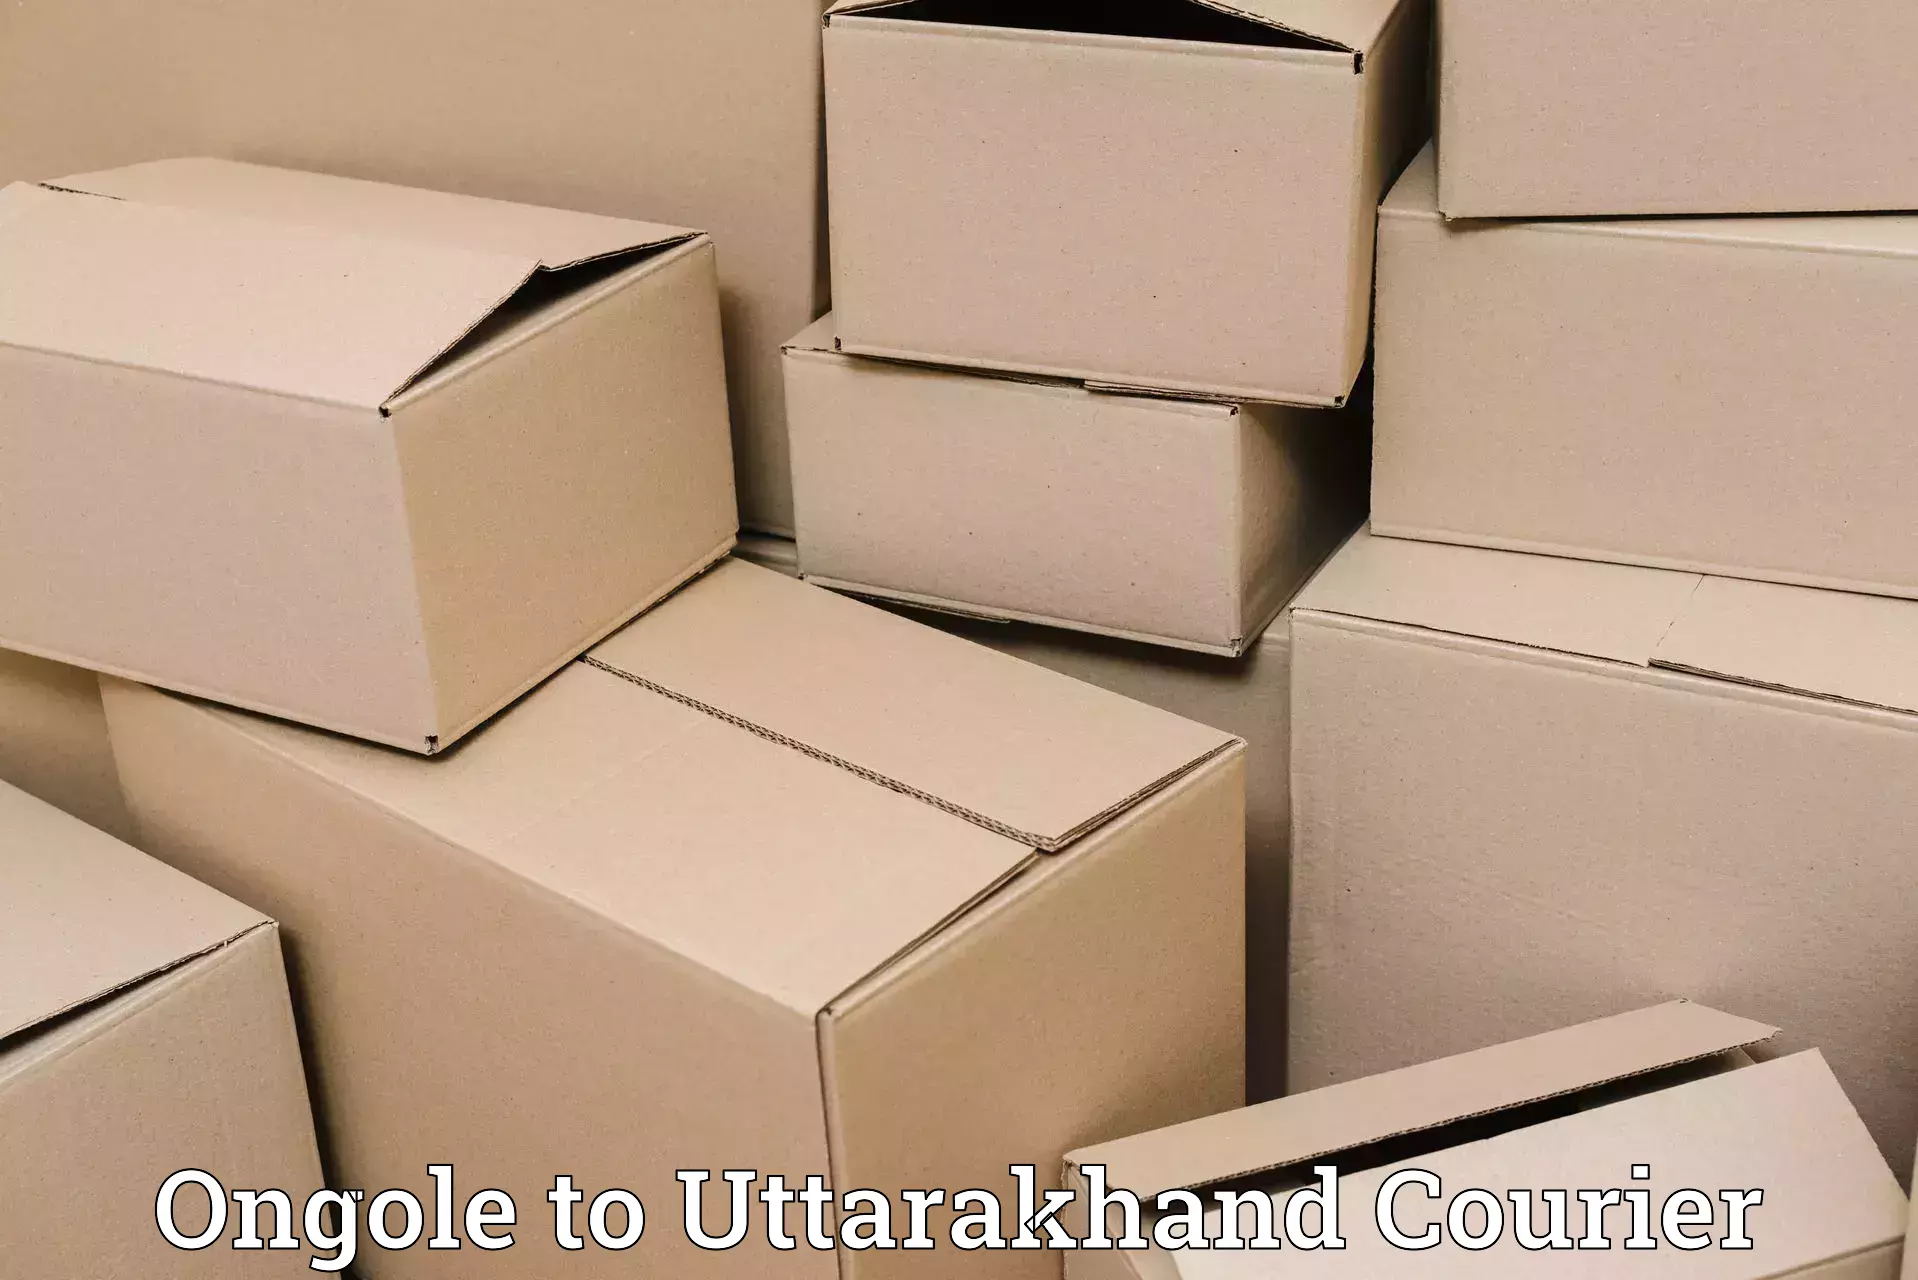 Cargo delivery service Ongole to Haridwar